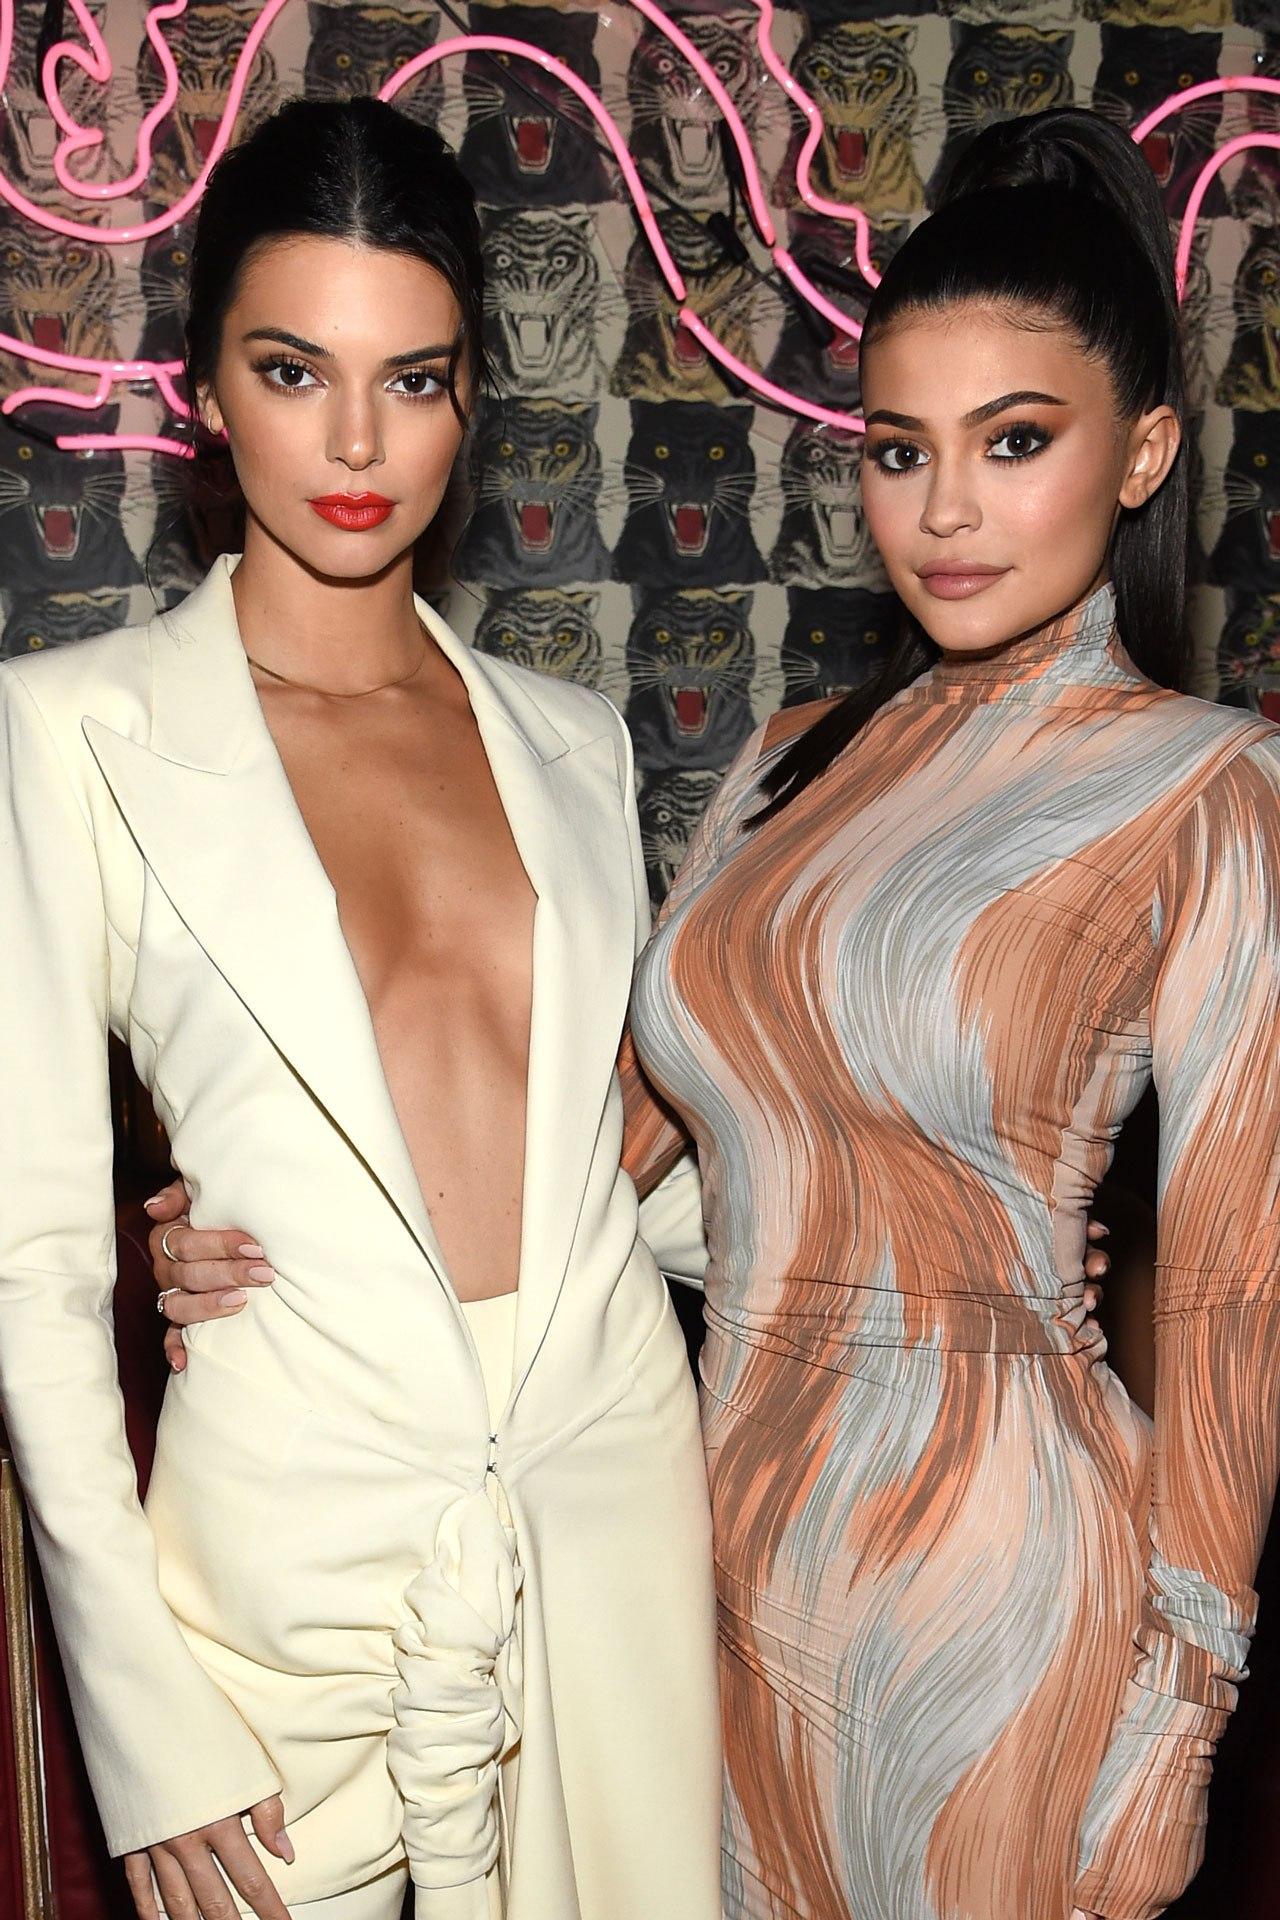 Kendall and Kylie Jenner's Handbag Line Is Finally Here. See All the Styles